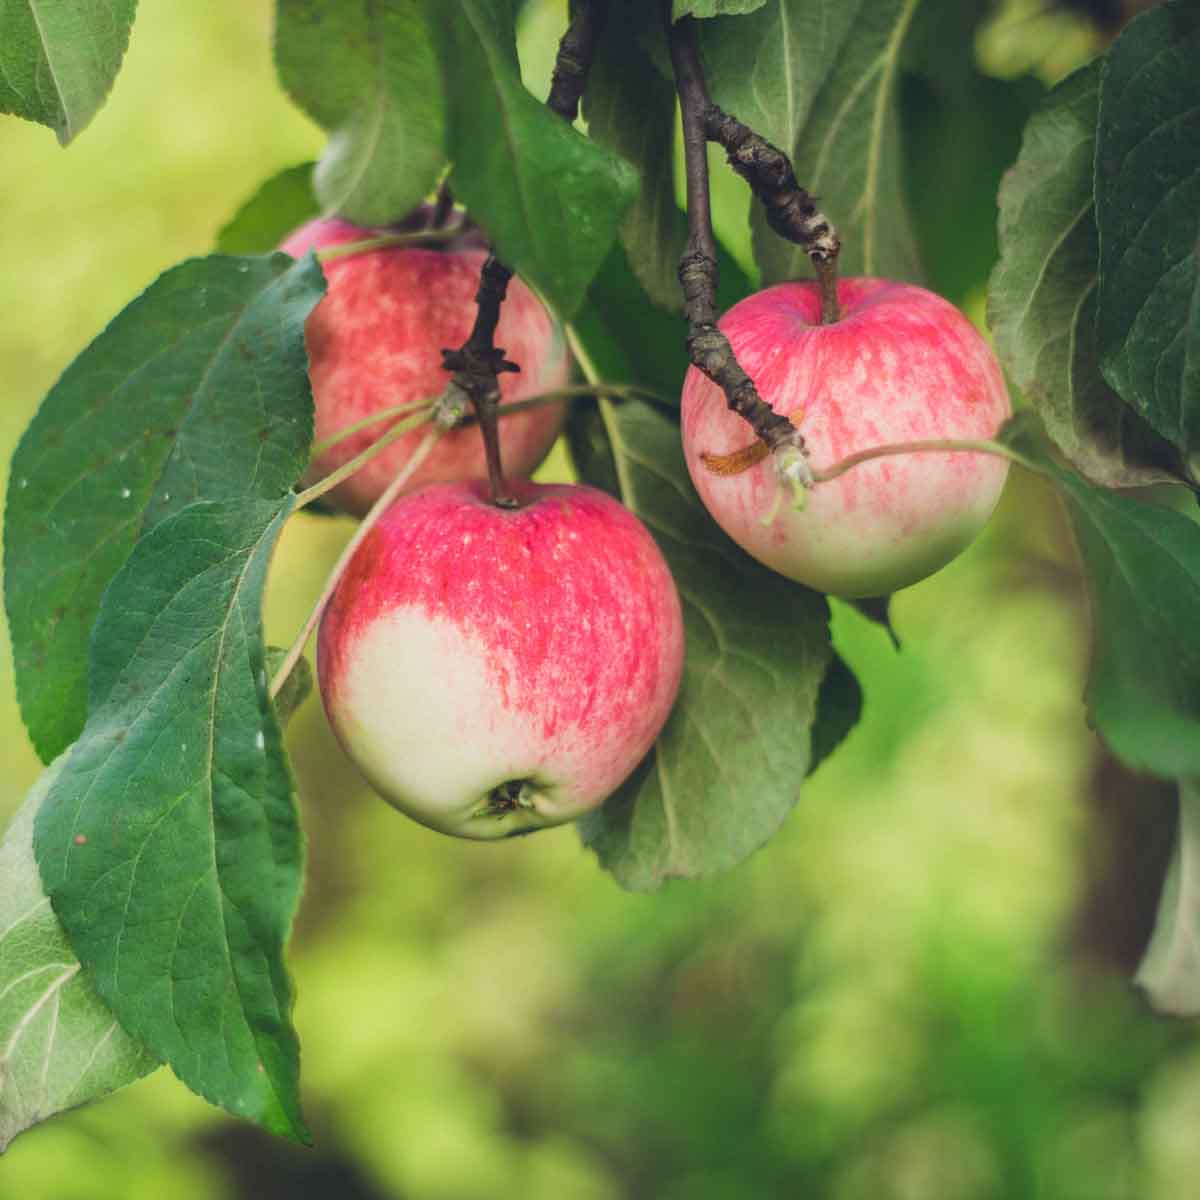 Ripening apples hanging from tree.